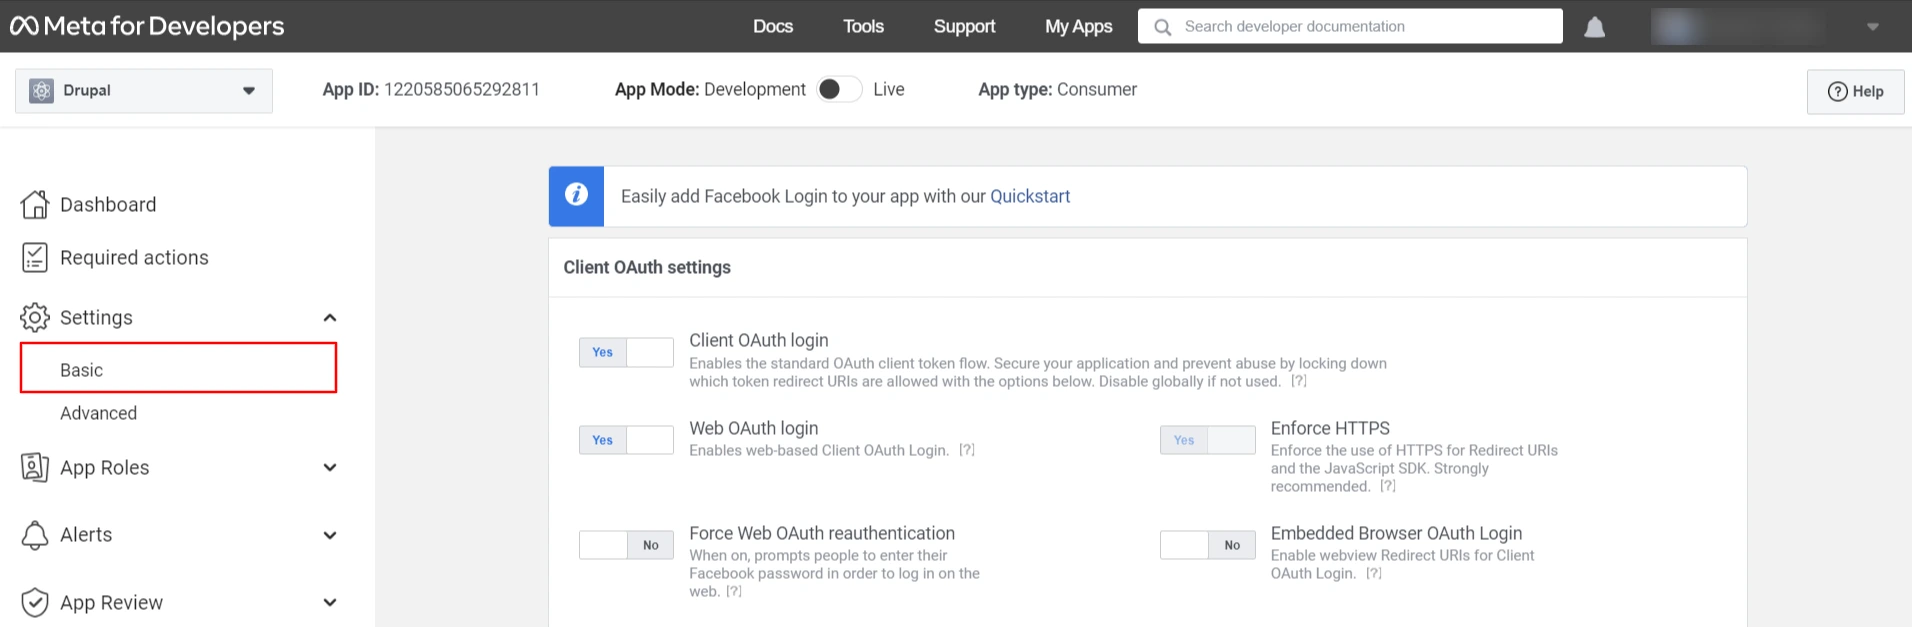 Facebook SSO login - from left side click on settings then basic